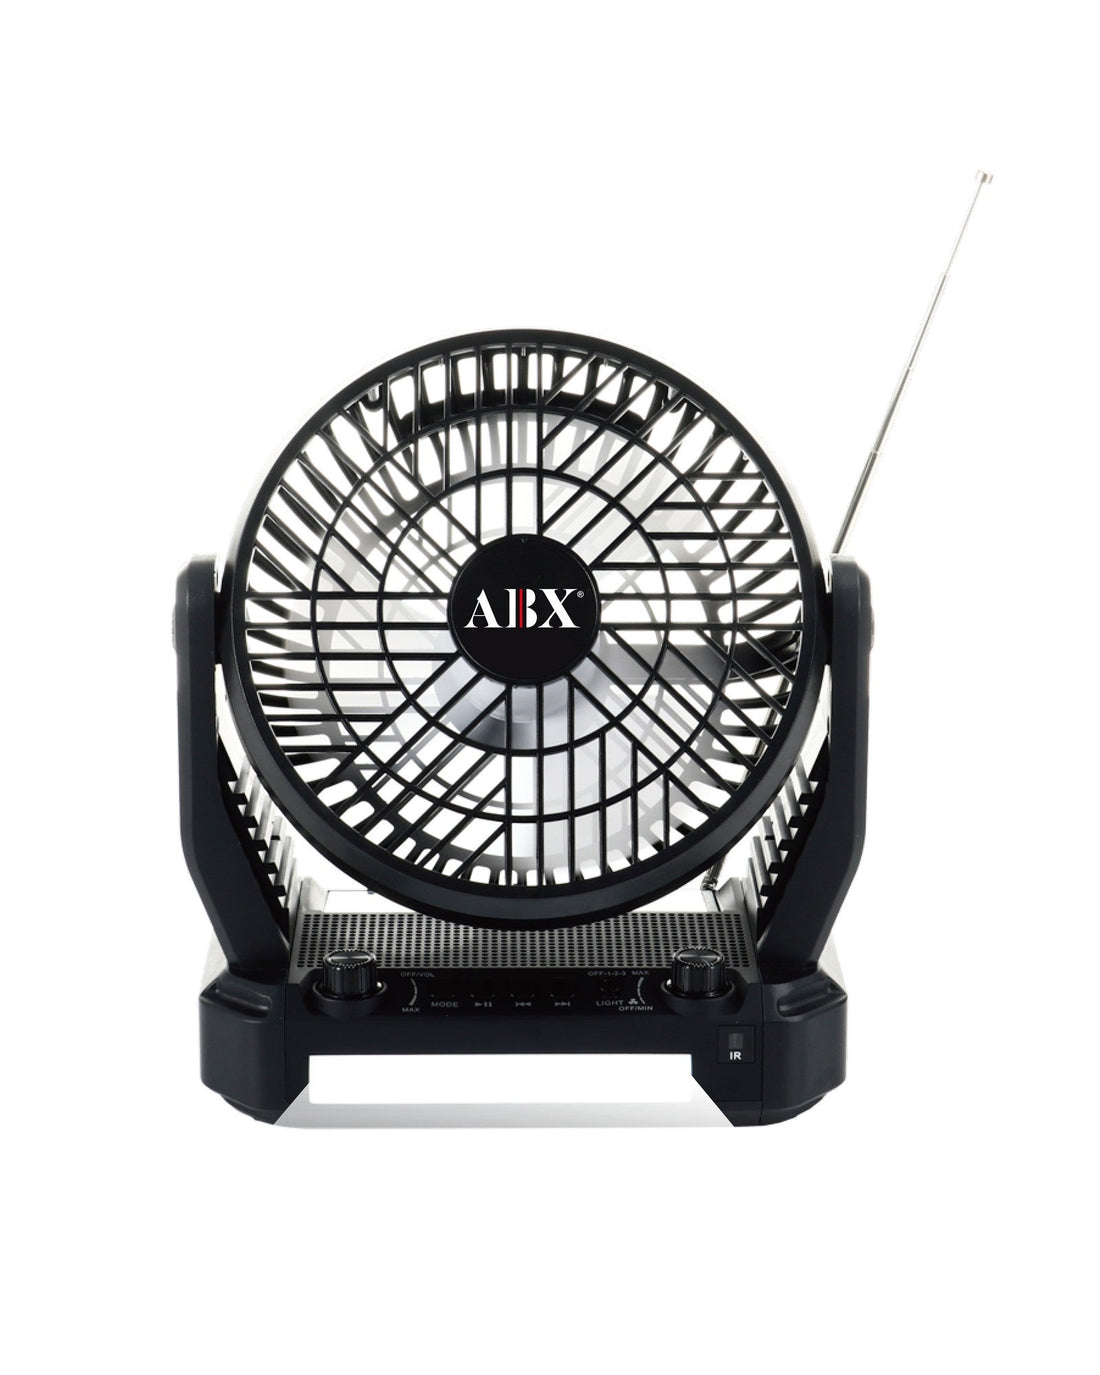 ABX Portable Solar Fan with Speaker and Flash Light - Top ElectrosRXF-40810059431669